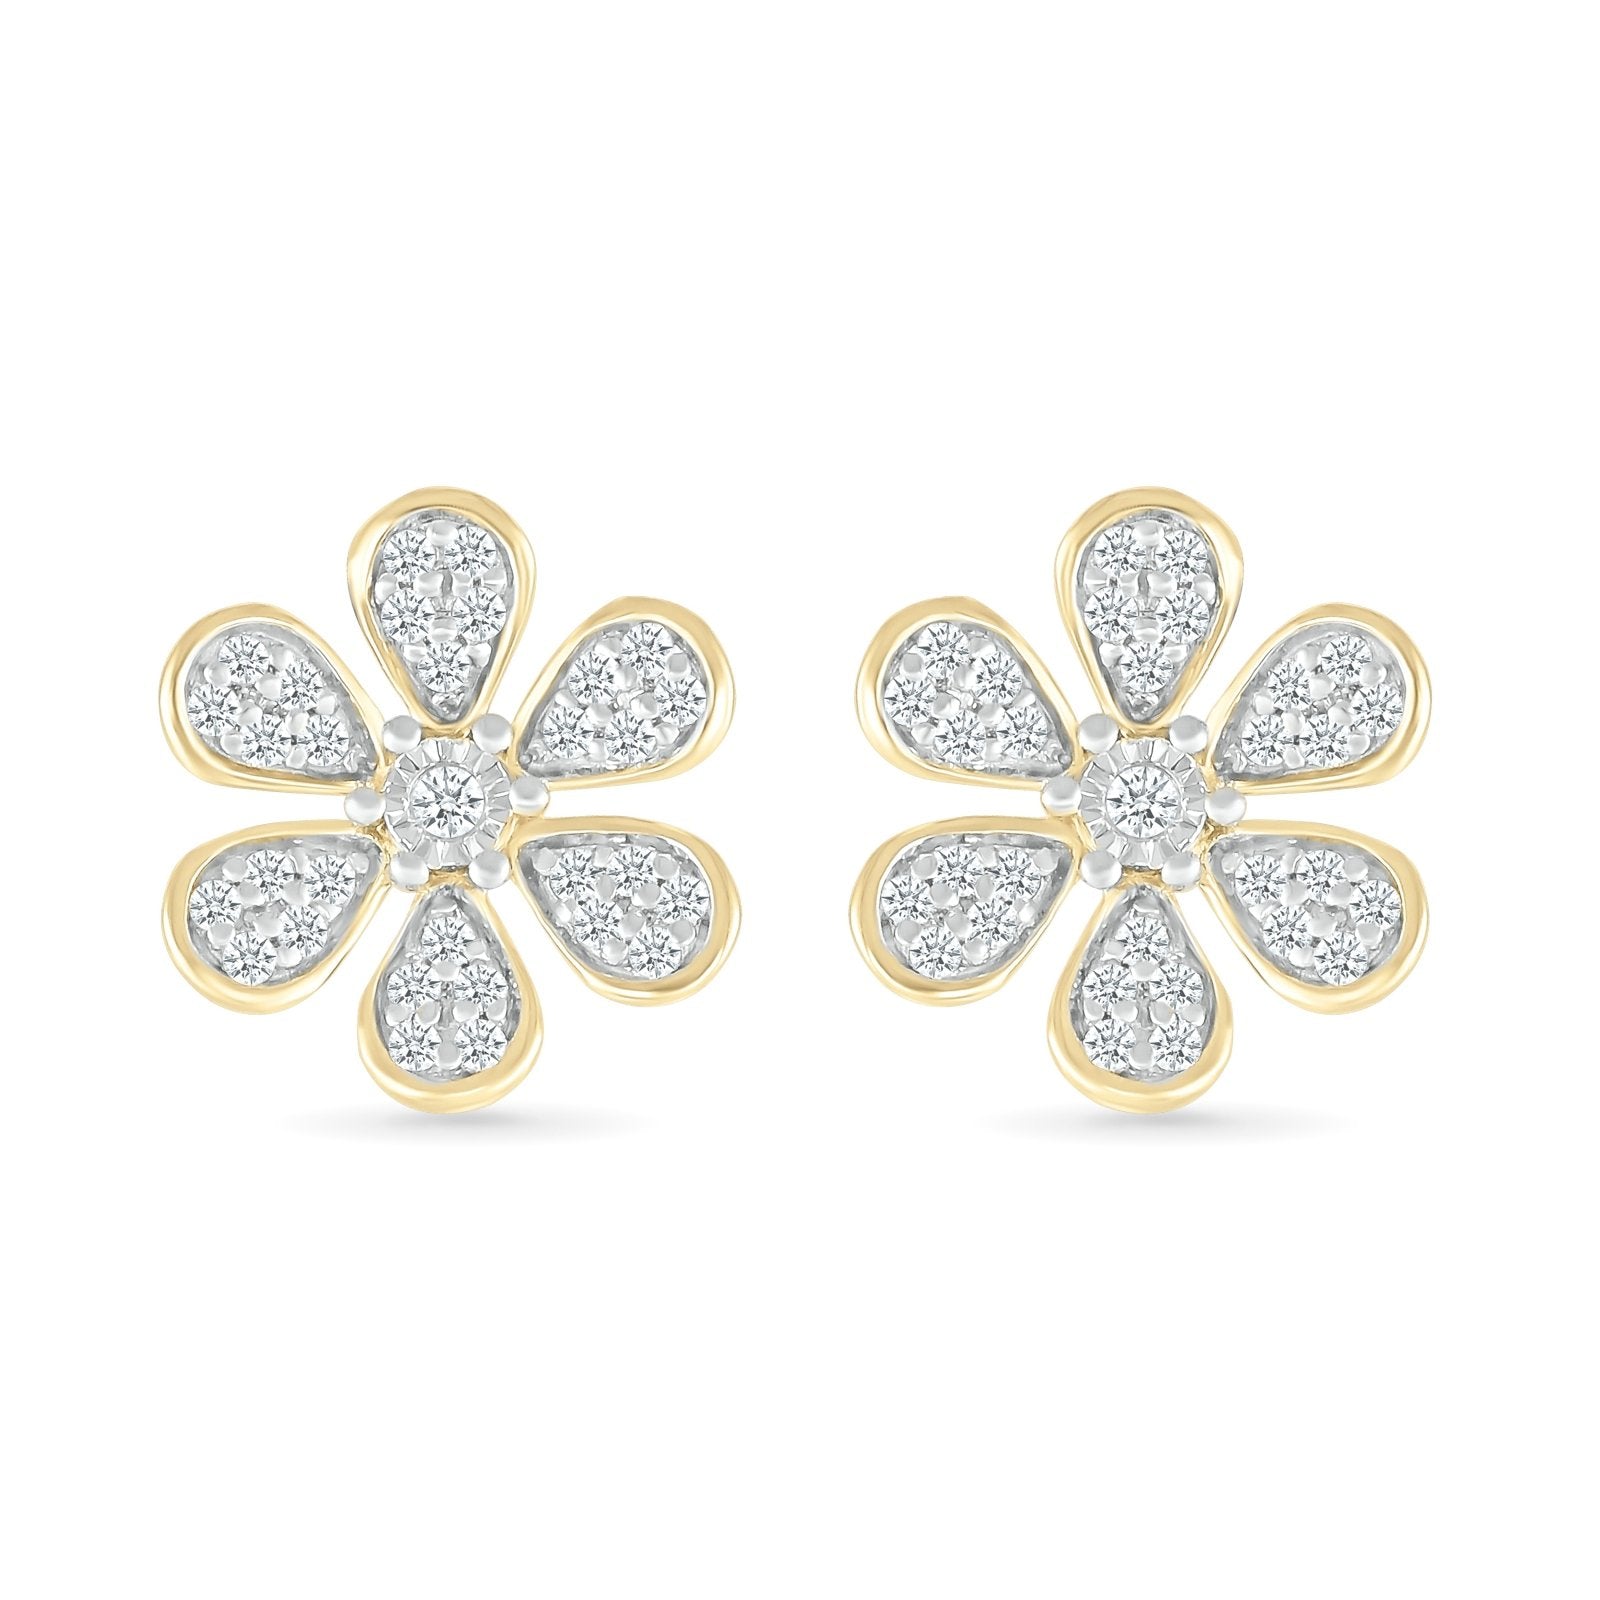 Diamond Flower Earrings with Gold Bezel Earrings Estella Collection #product_description# 32669 10k April Birthstone Colorless Gemstone #tag4# #tag5# #tag6# #tag7# #tag8# #tag9# #tag10#